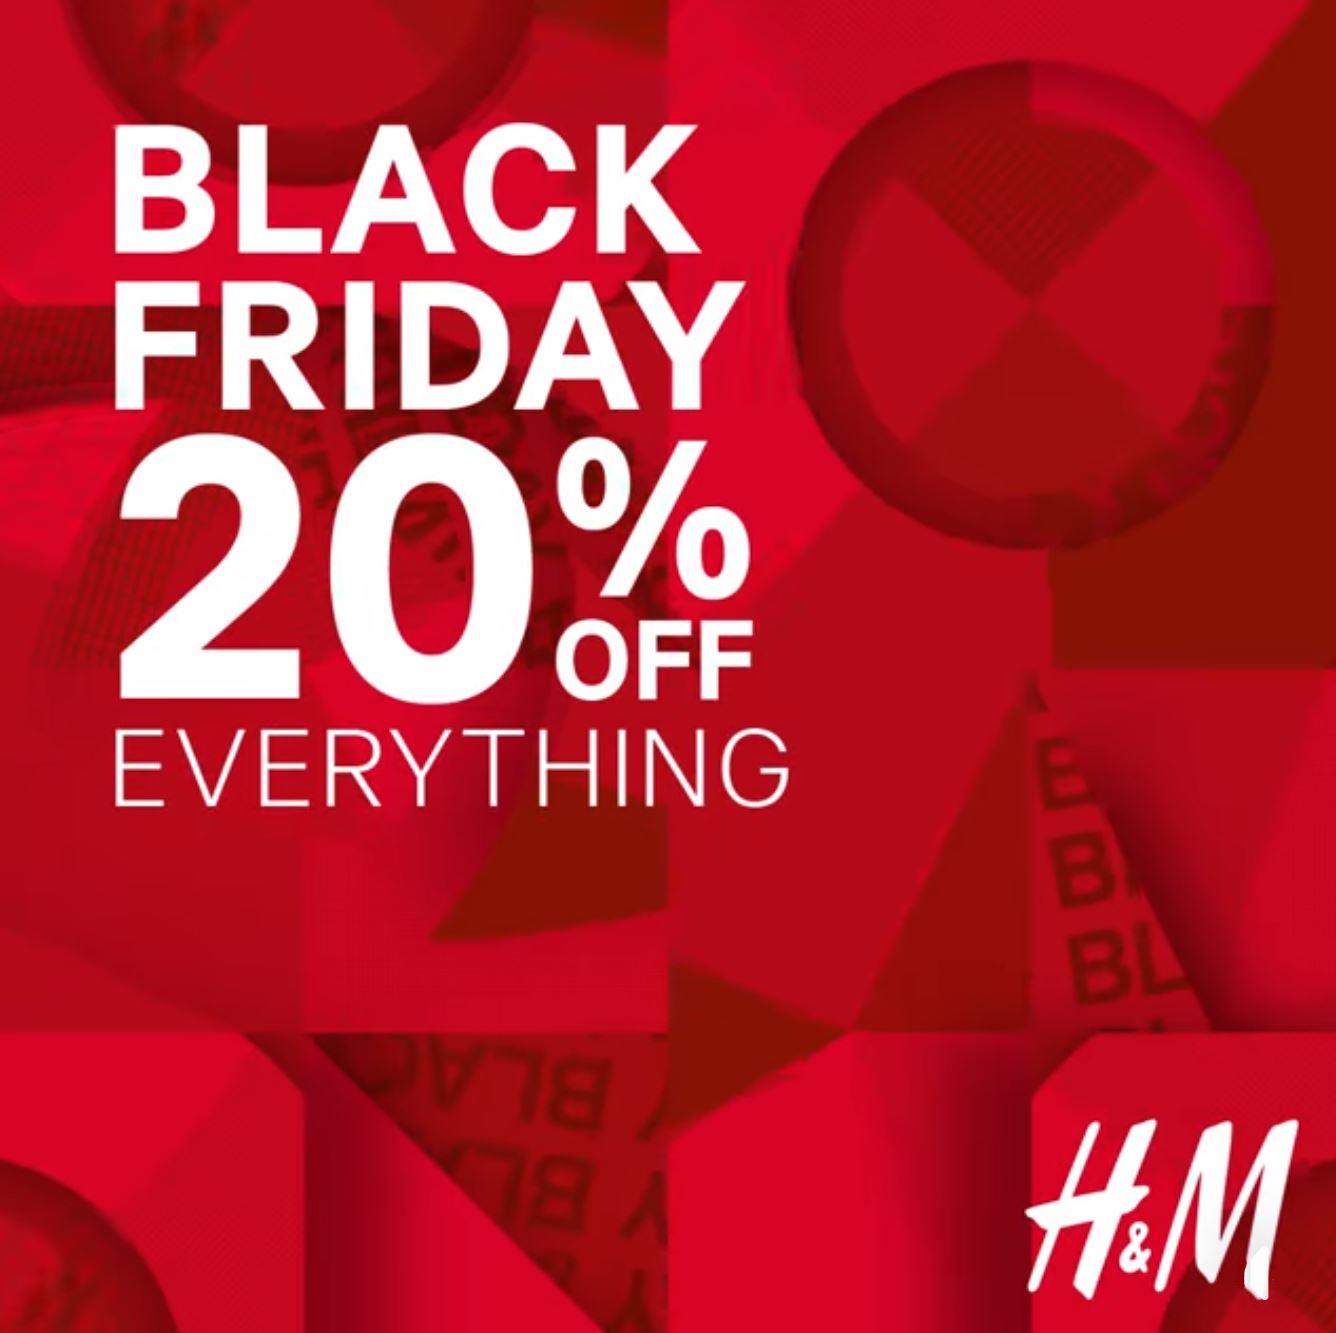 H&M Black Friday Deals - Get 20% off on everything! in India - Is Black Friday Deals Available In India